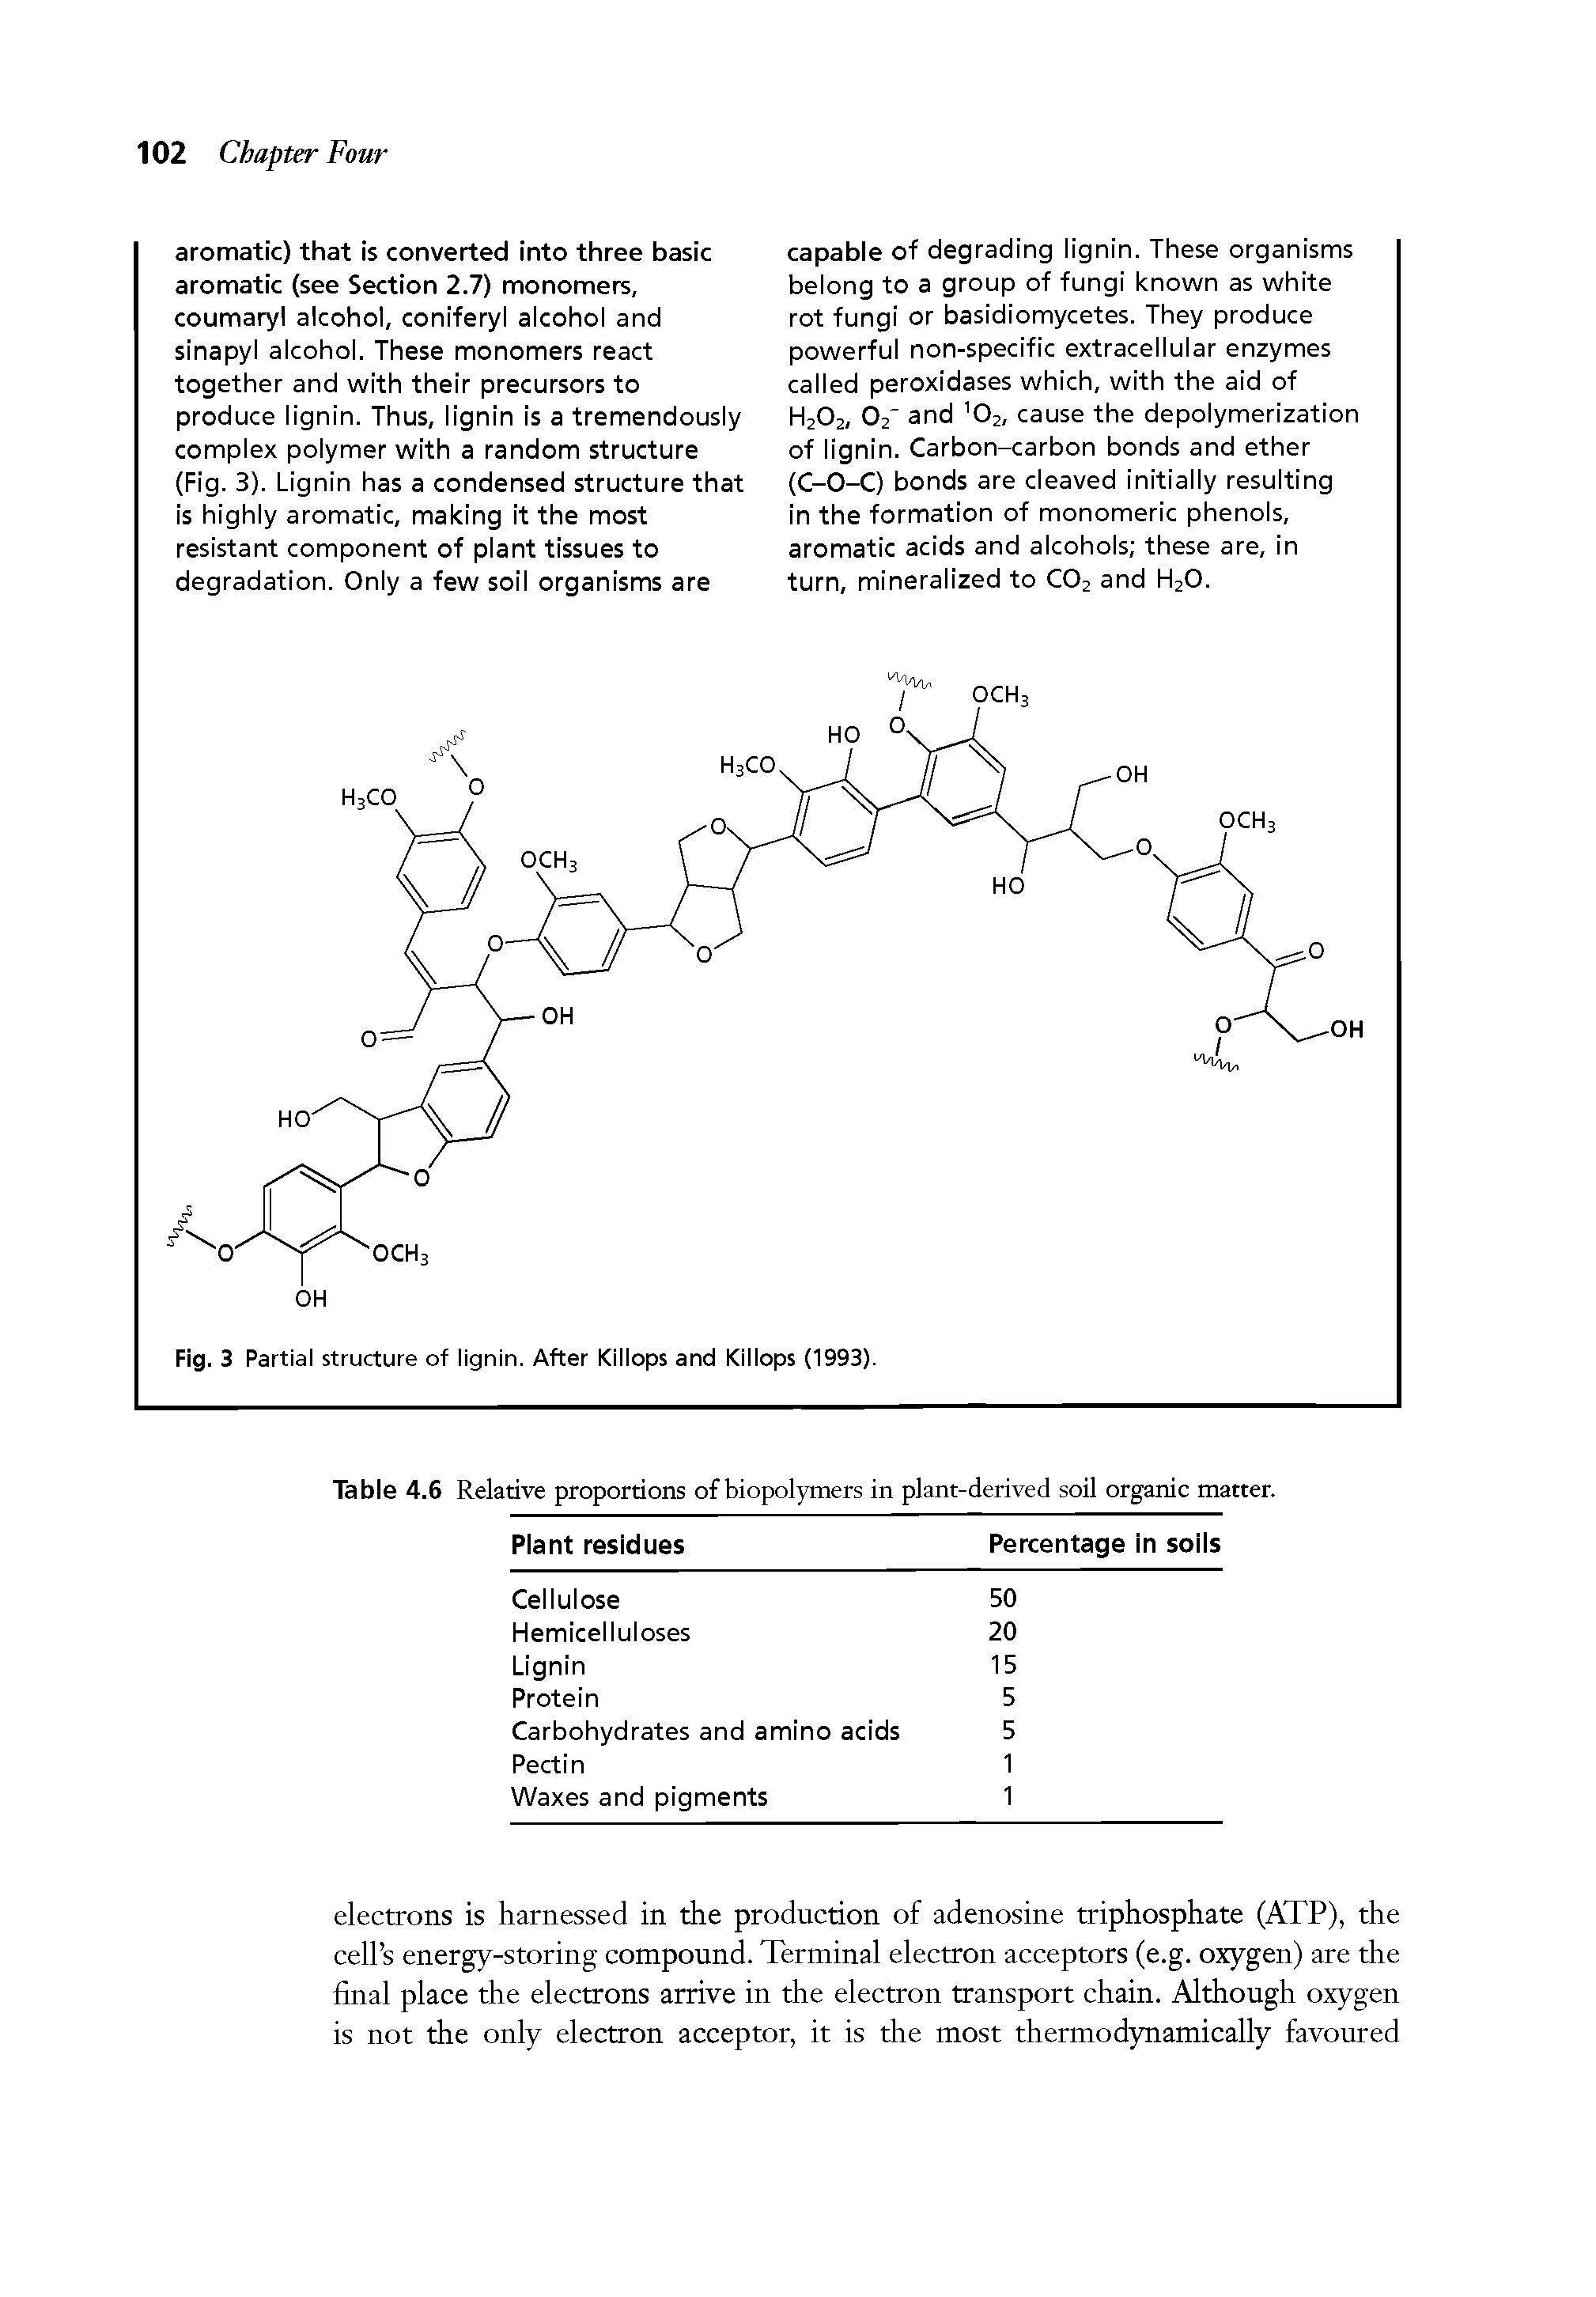 Fig. 3 Partial structure of lignin. After Killops and Killops (1993).